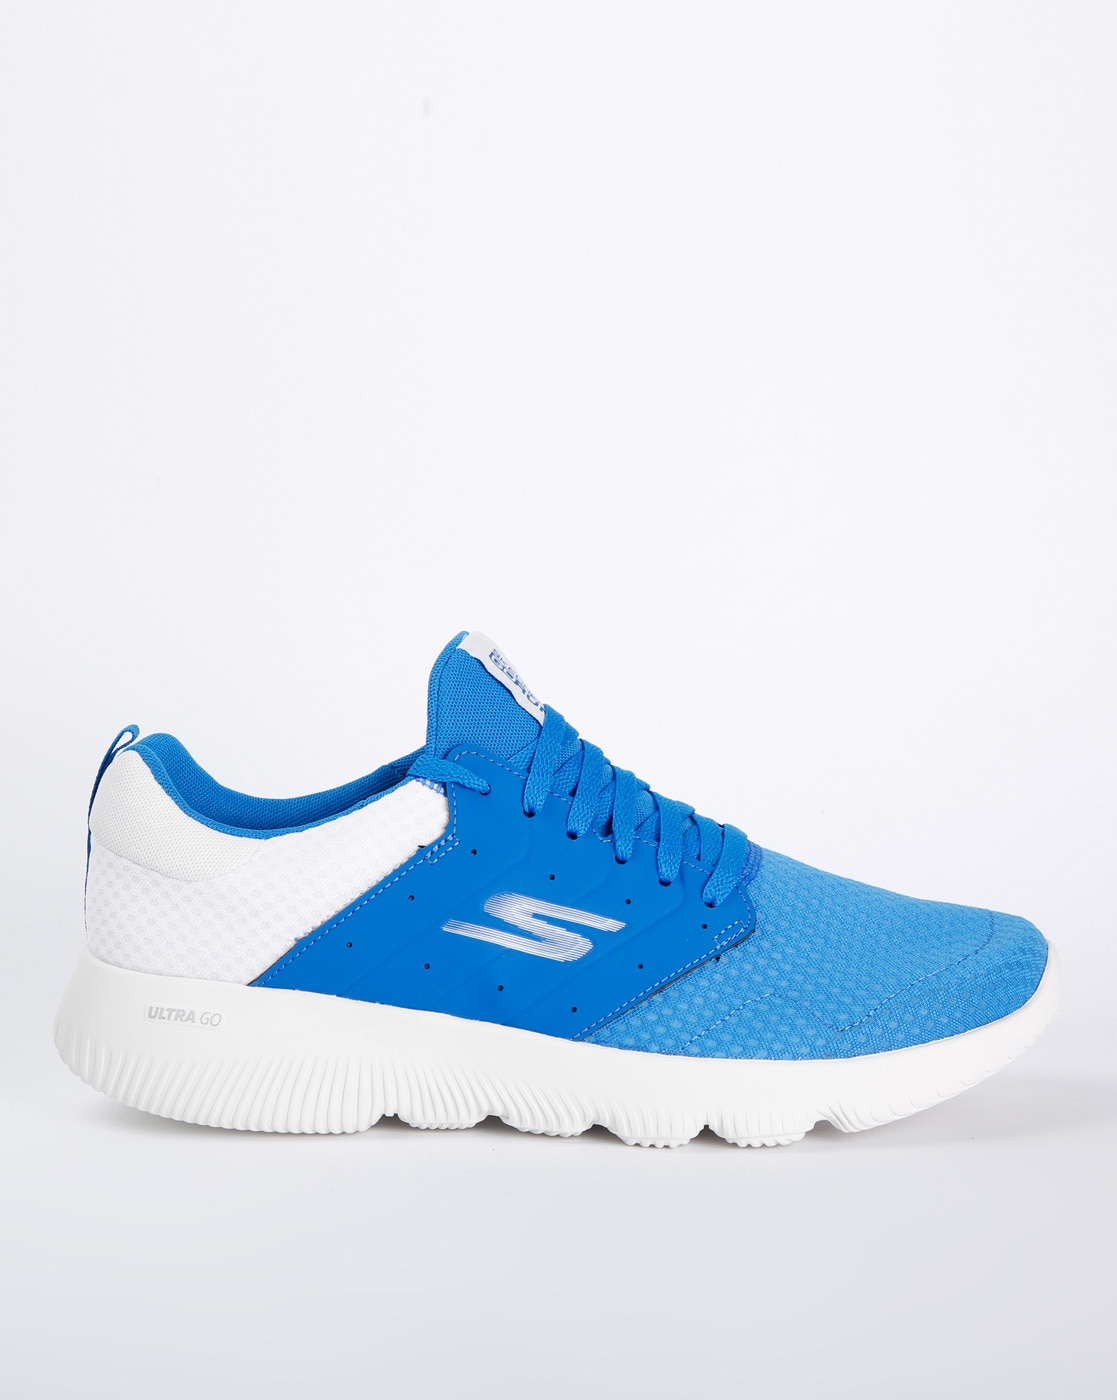 Buy Light Blue \u0026 White Sports Shoes for 